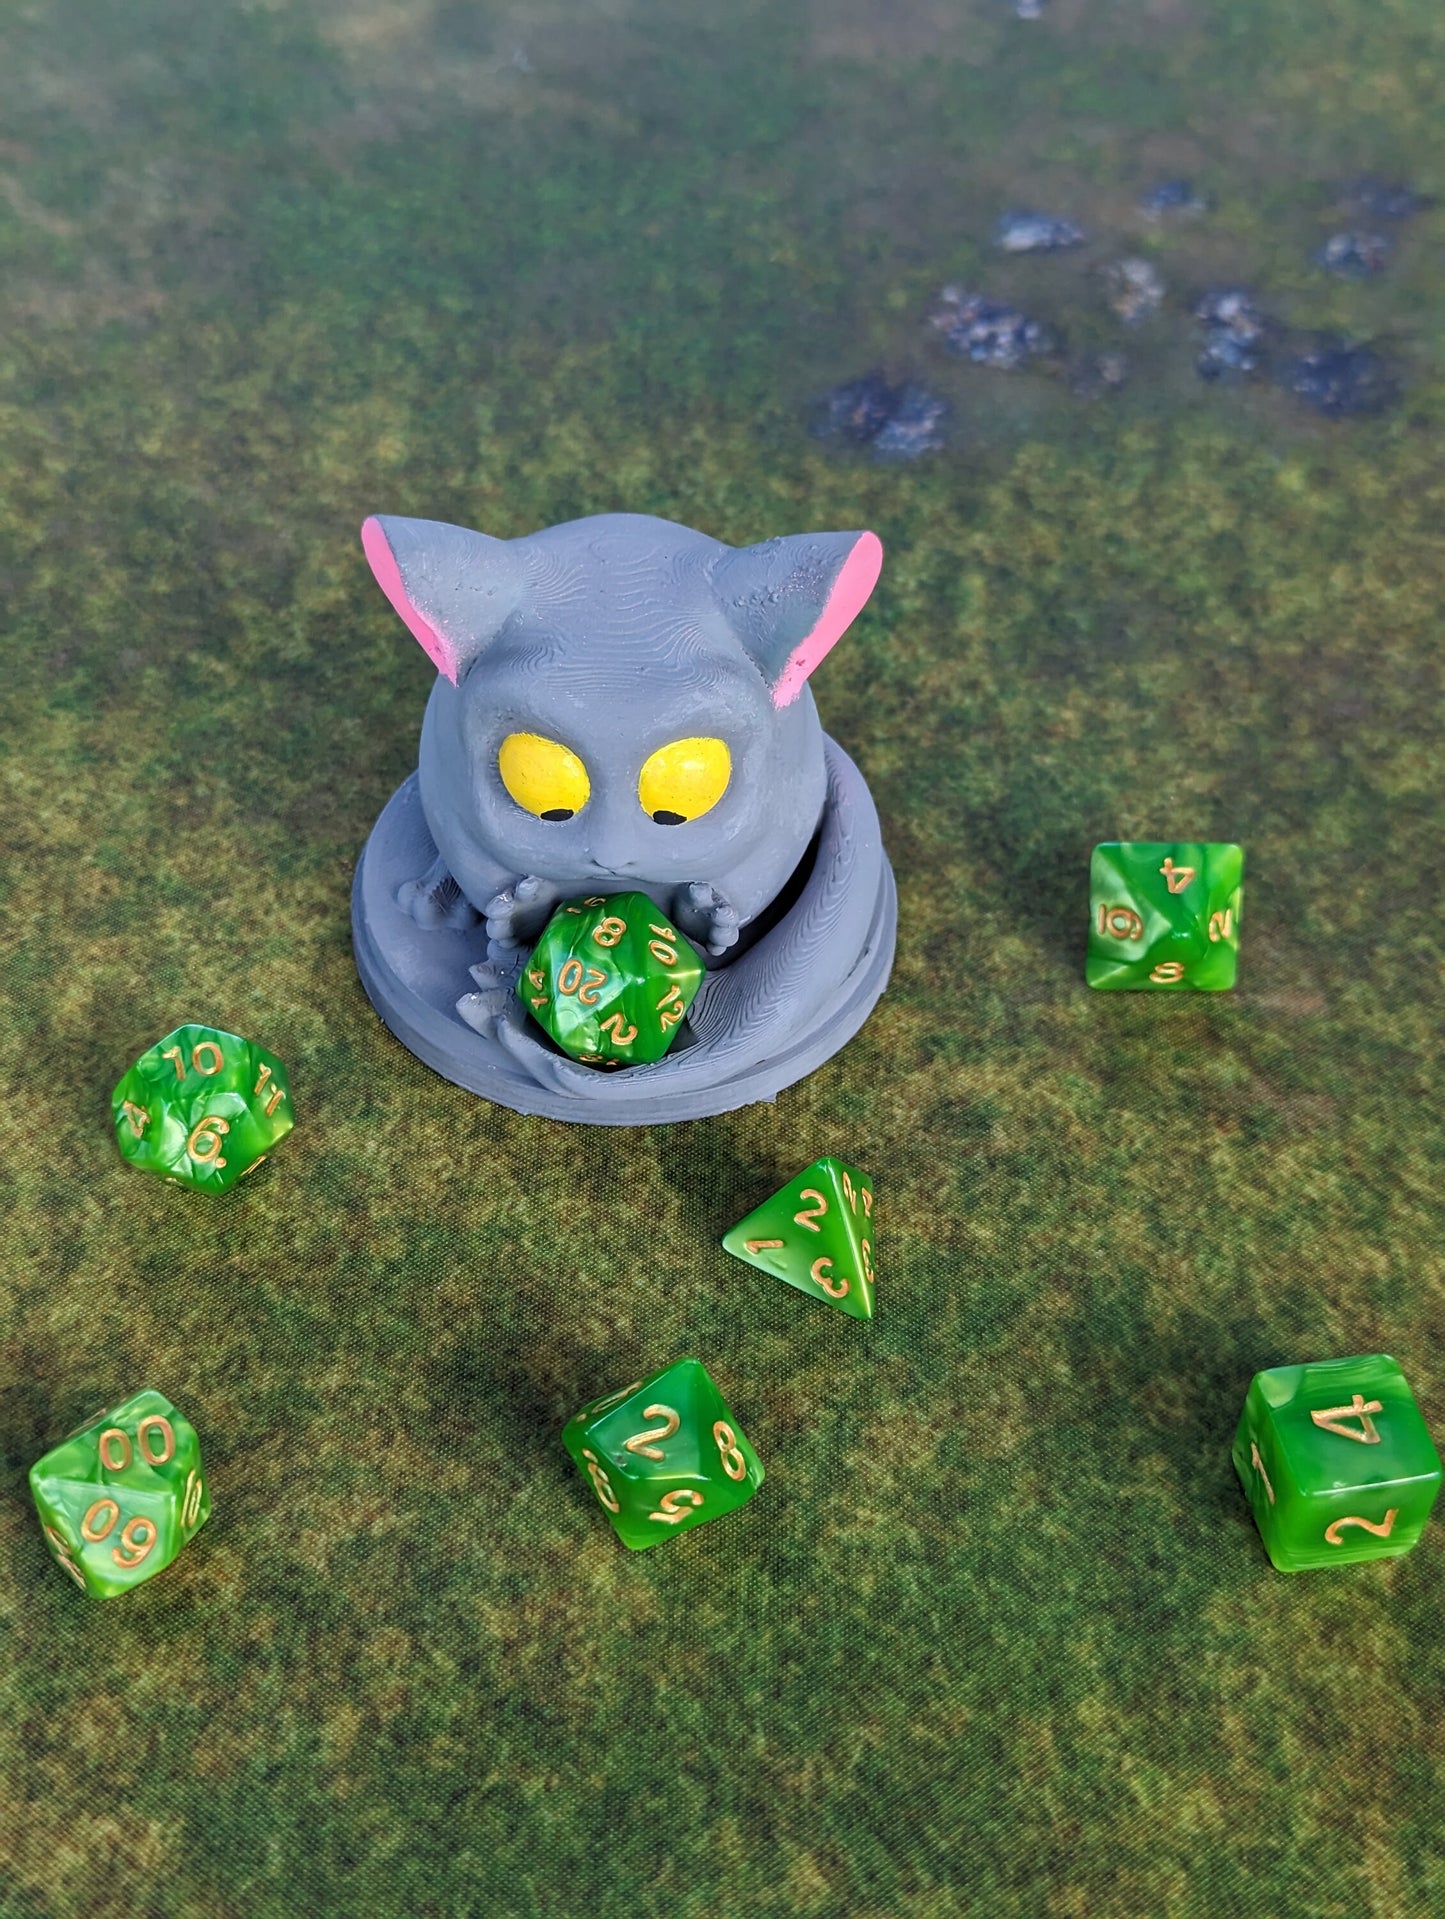 Chinchilla Toy 3D Printed Dice Guardian - Dice Jail | RPG Dice Vault | D20 Box | Player Unique Gift - Safeguard Your Dice with Fluffy Charm!